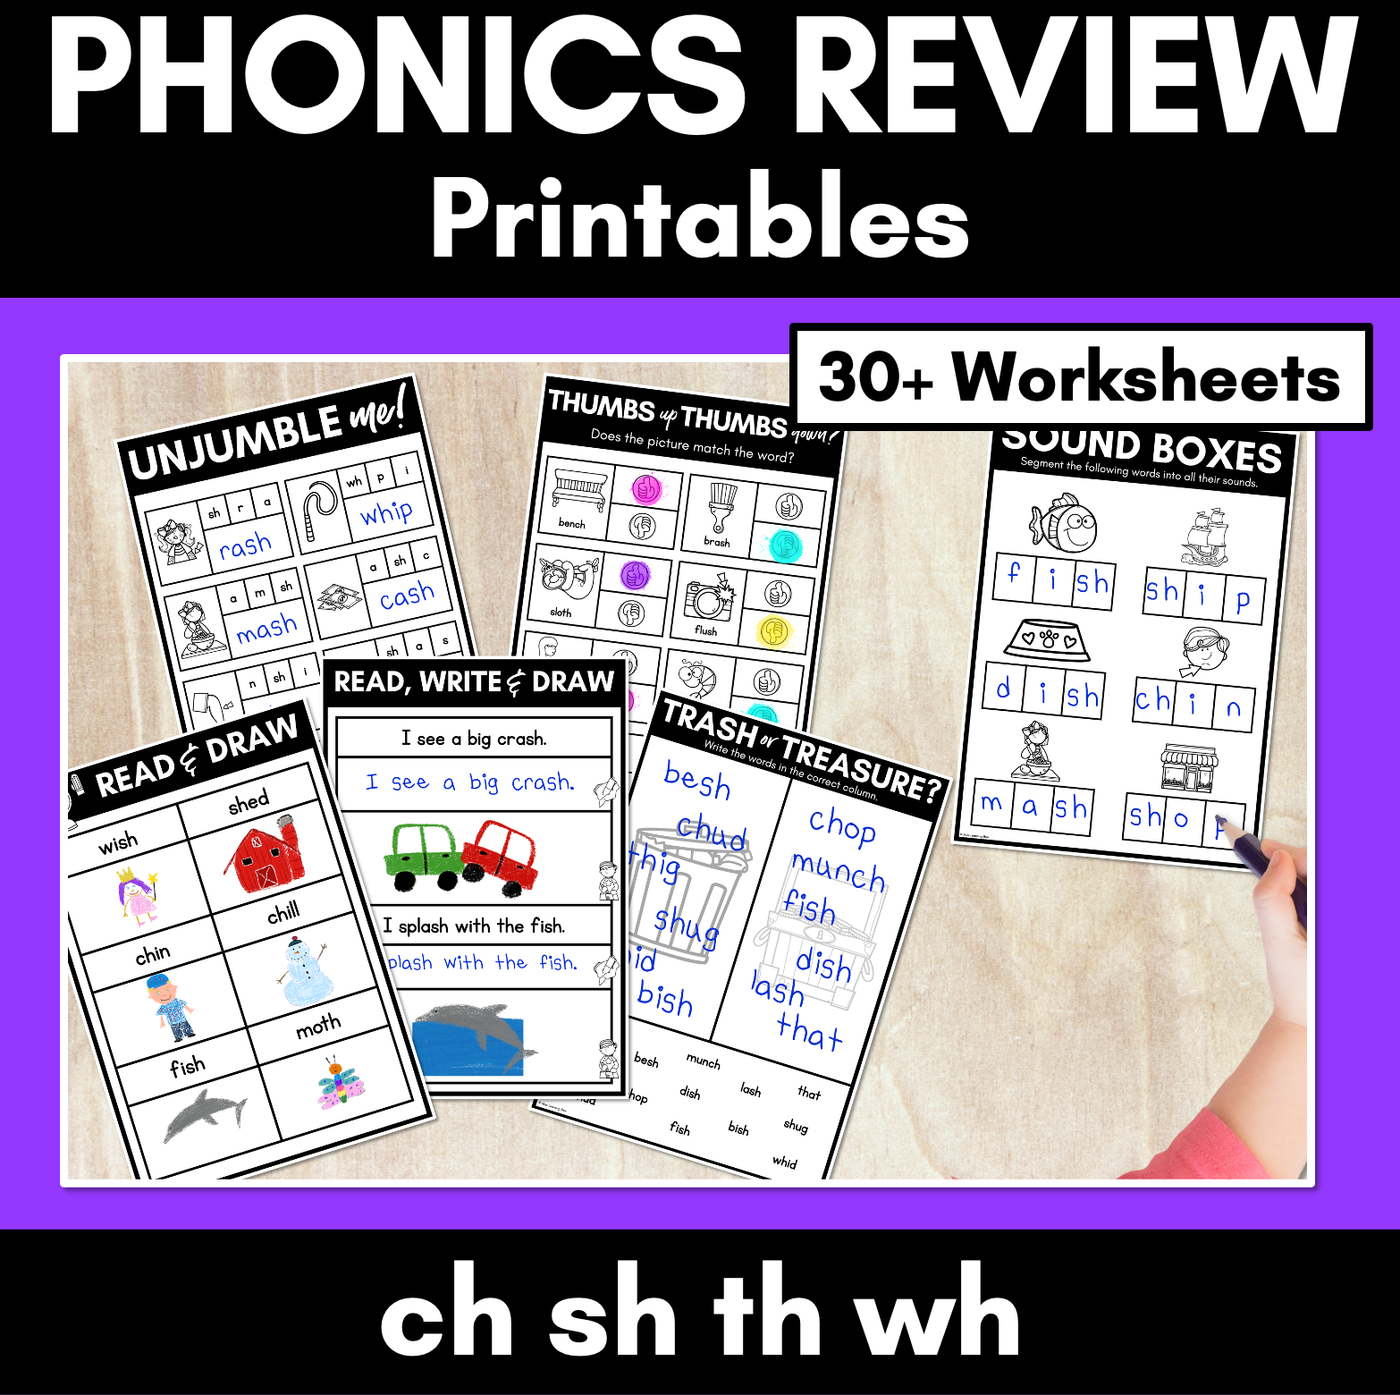 CH SH TH WH Worksheets - PHONICS REVIEW for Consonant Digraphs